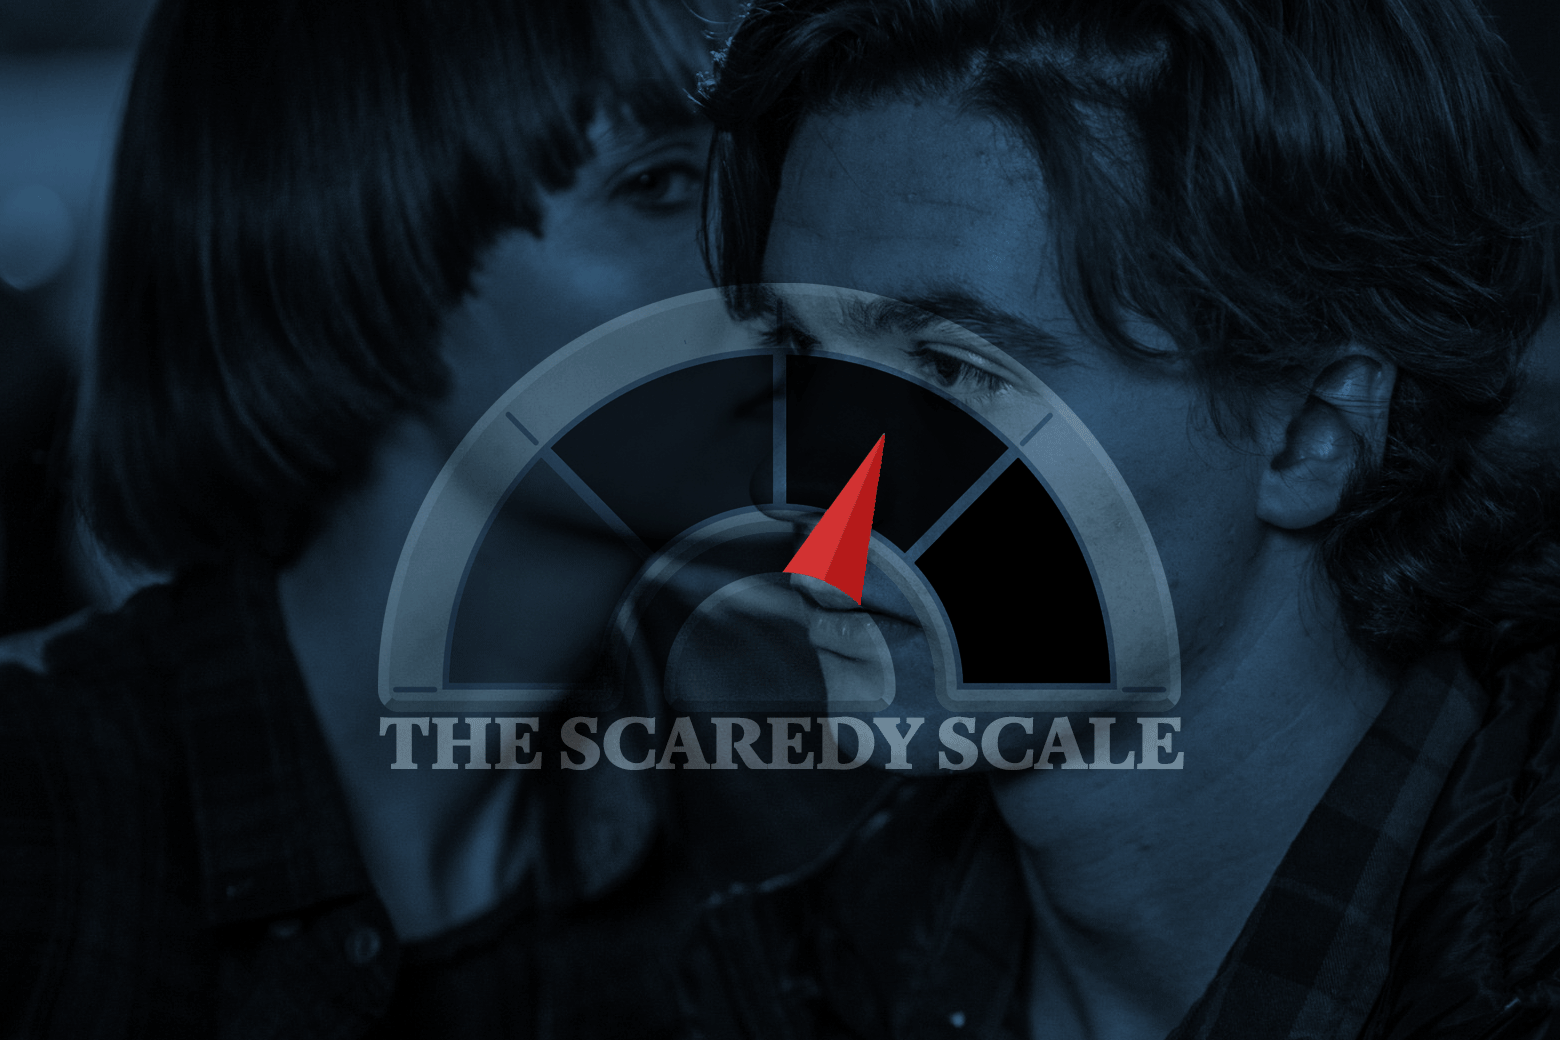 A woman whispers in a young man's ear. Over this a logo: a twitching meter with the name "the Scaredy Scale."